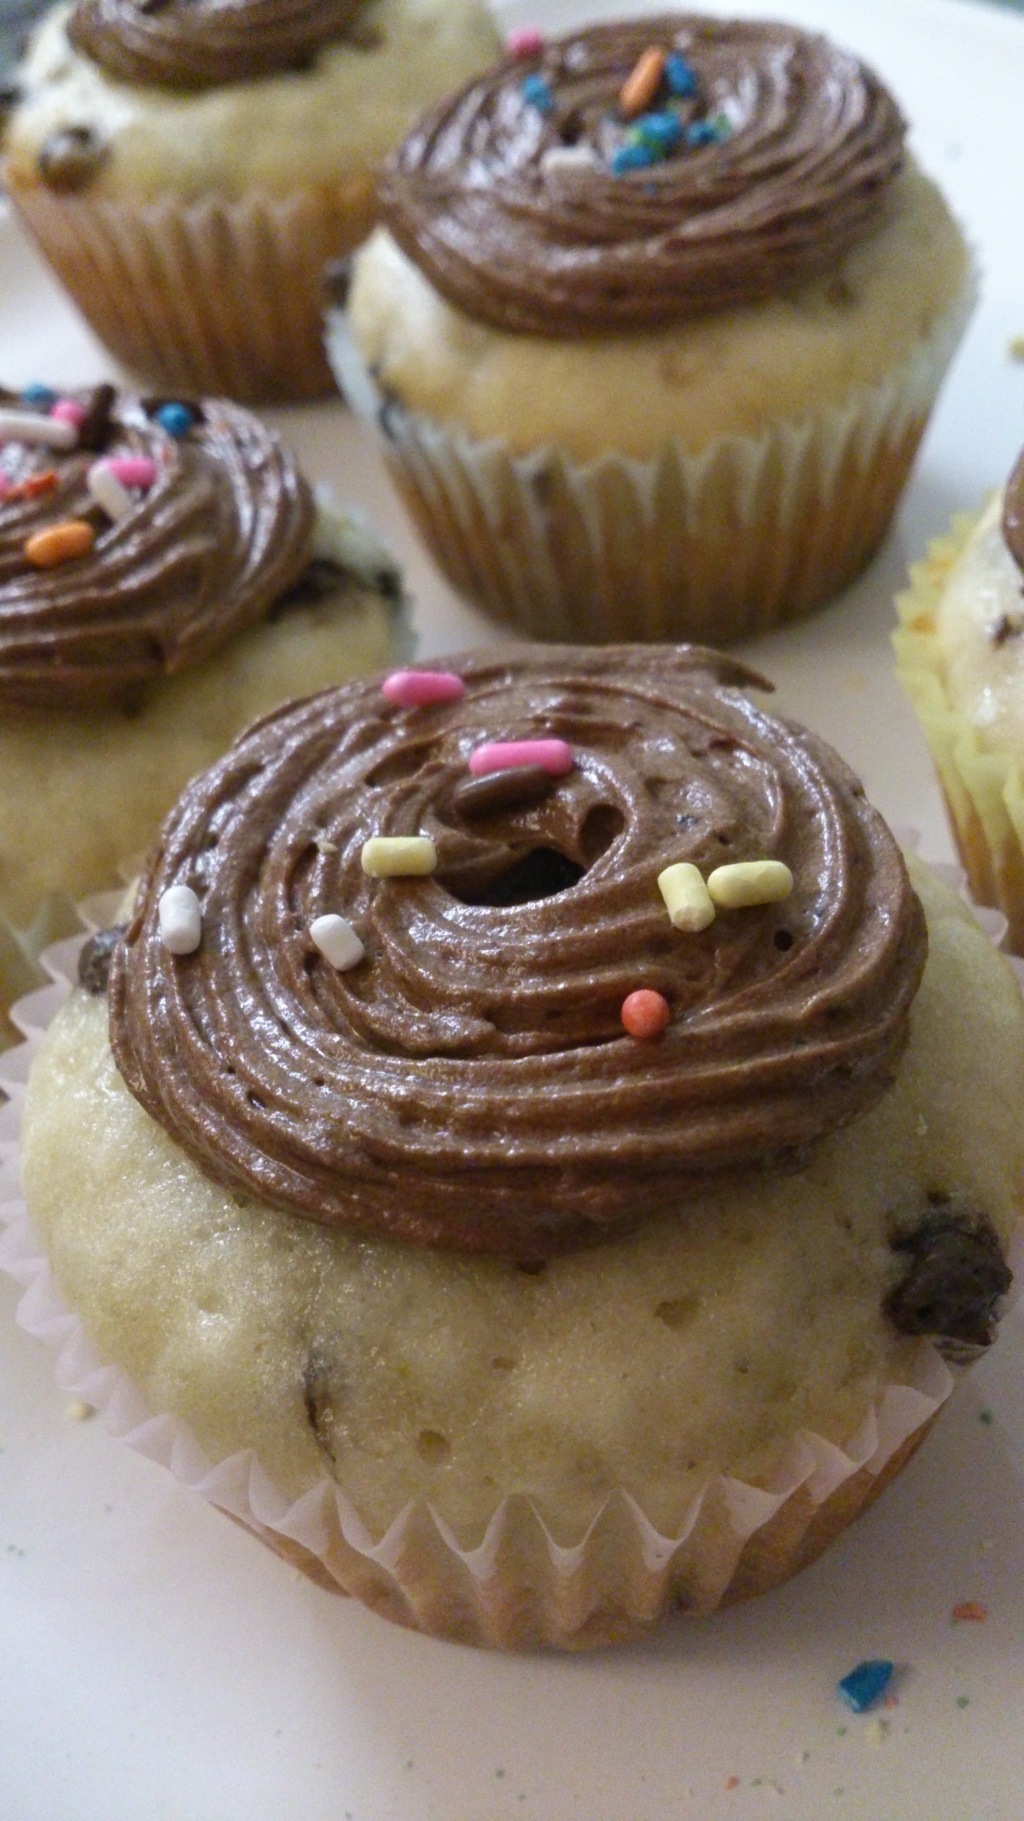 Banana and Chocolate Chip Muffin with Chocolate Frosting